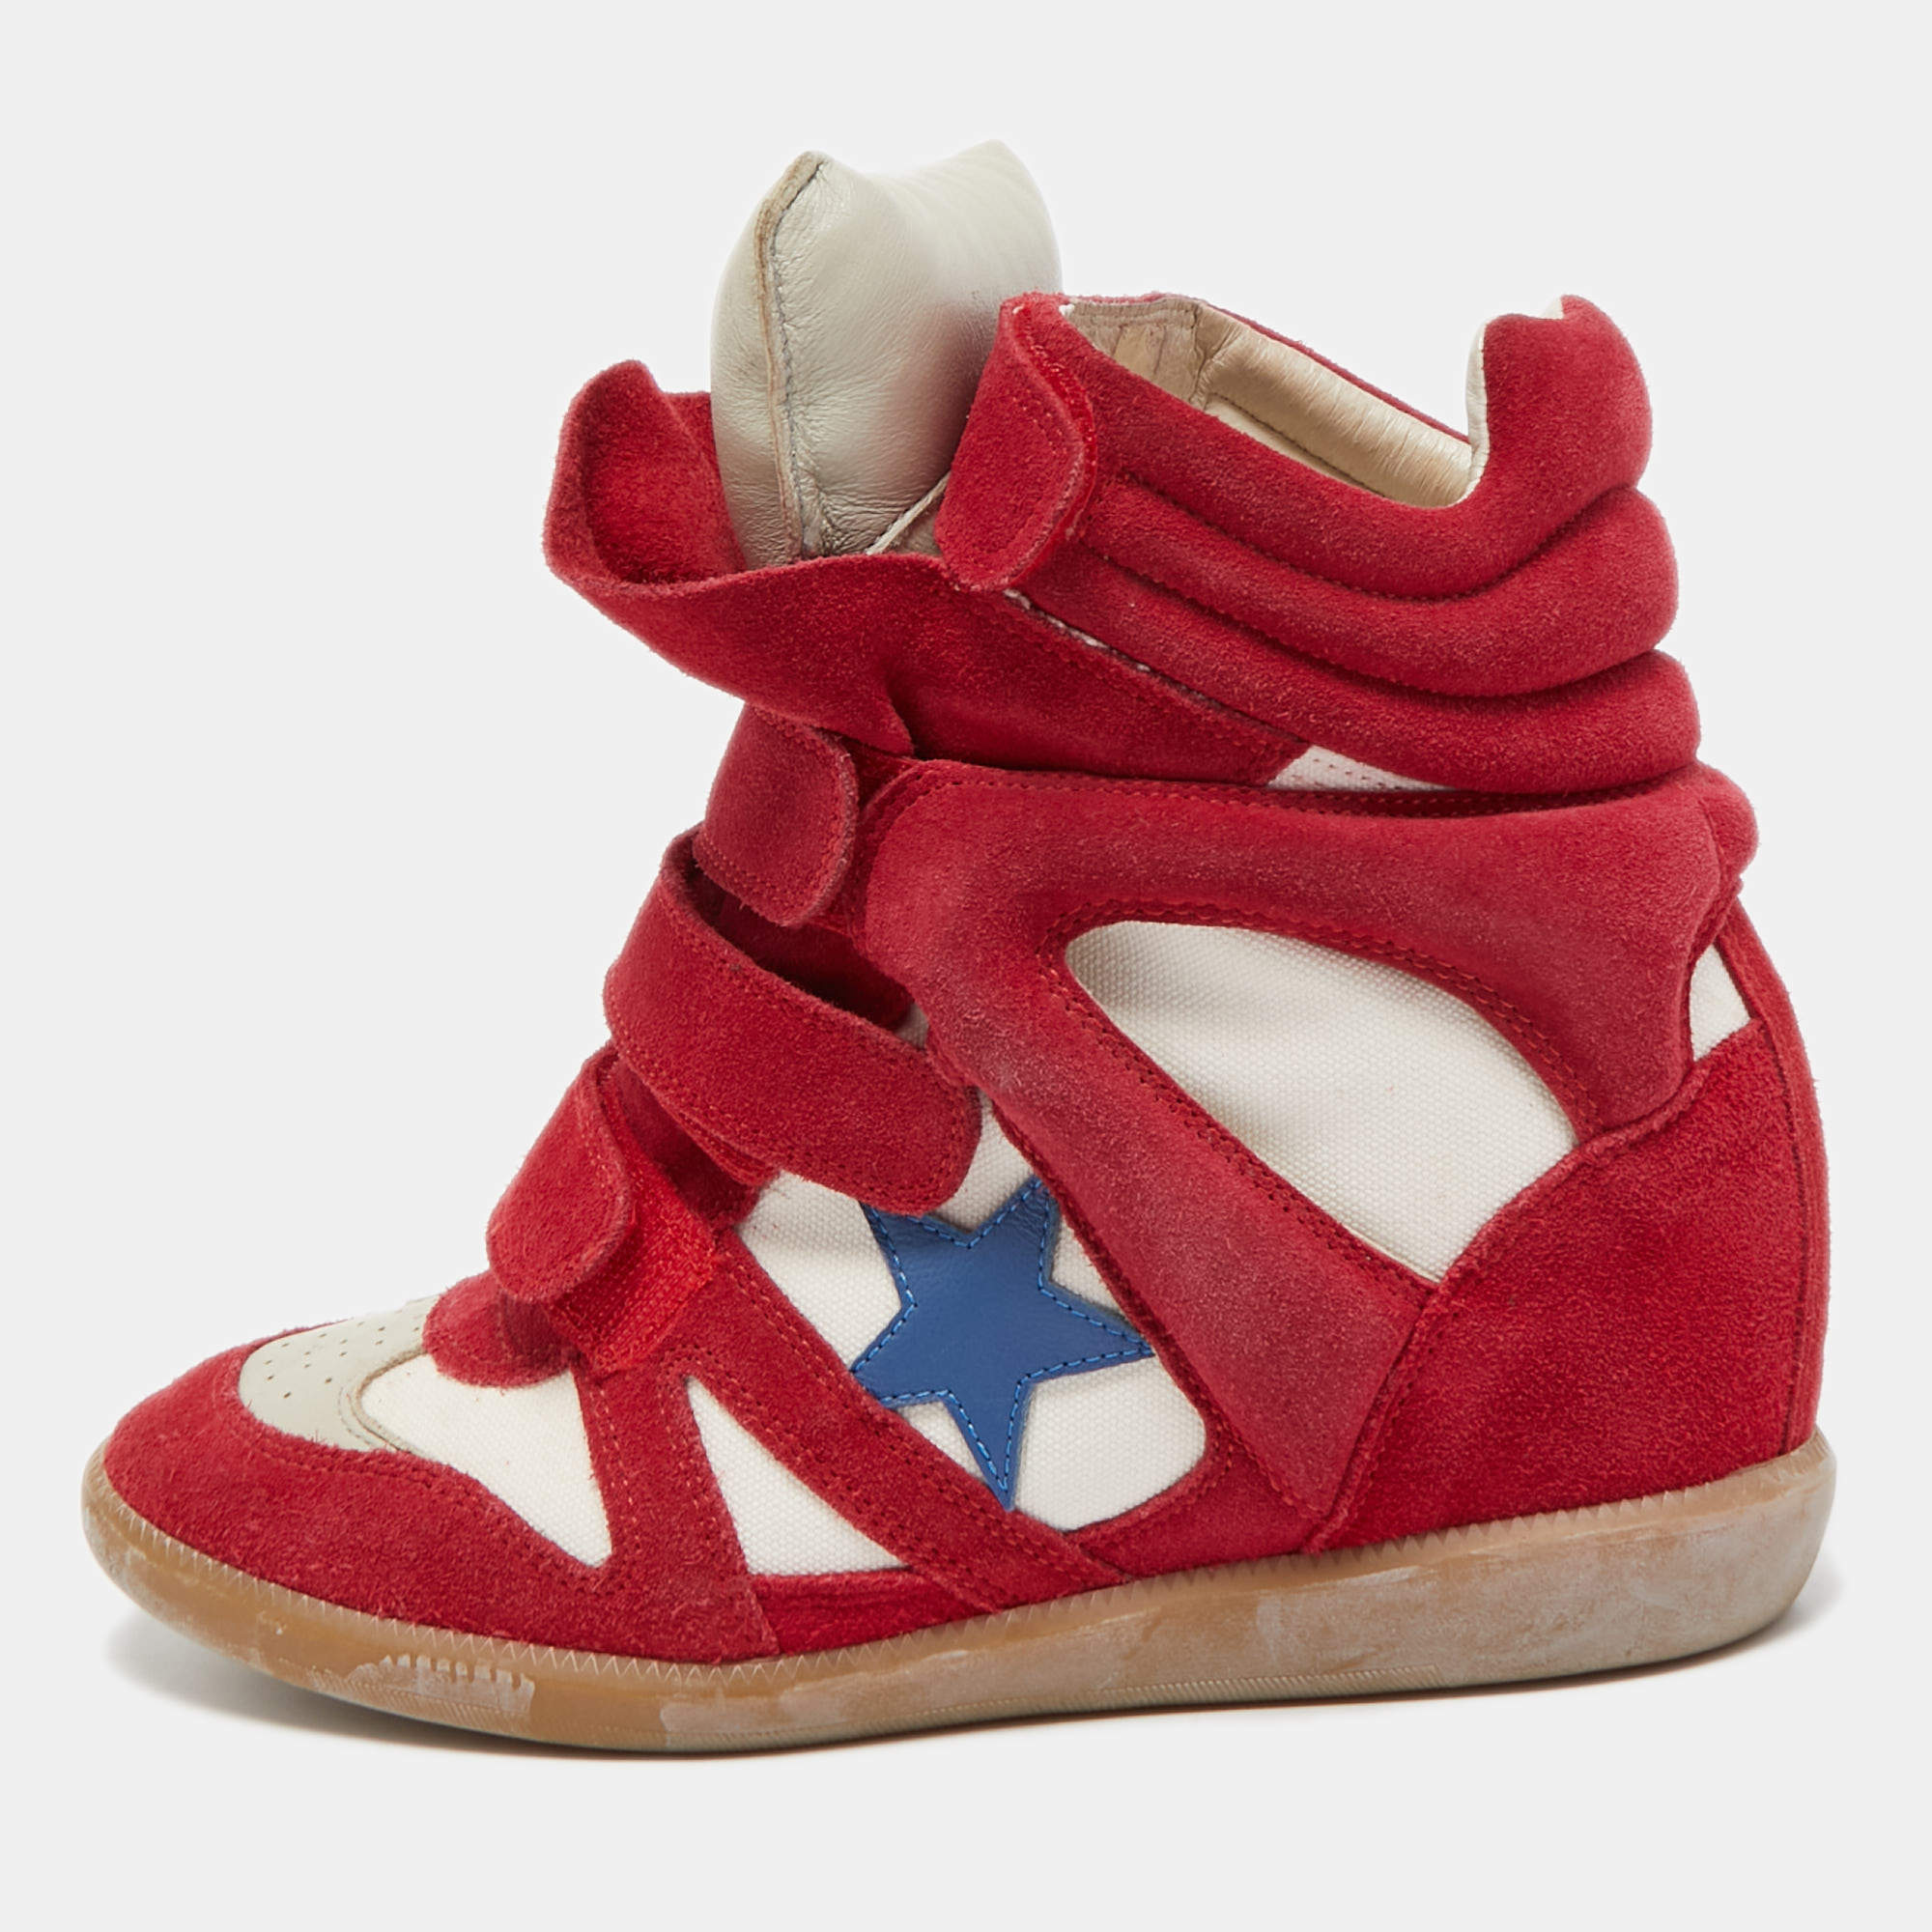 Marant Red/White Suede and Canvas Bekett Wedge Sneakers Size 39 Isabel Marant | TLC